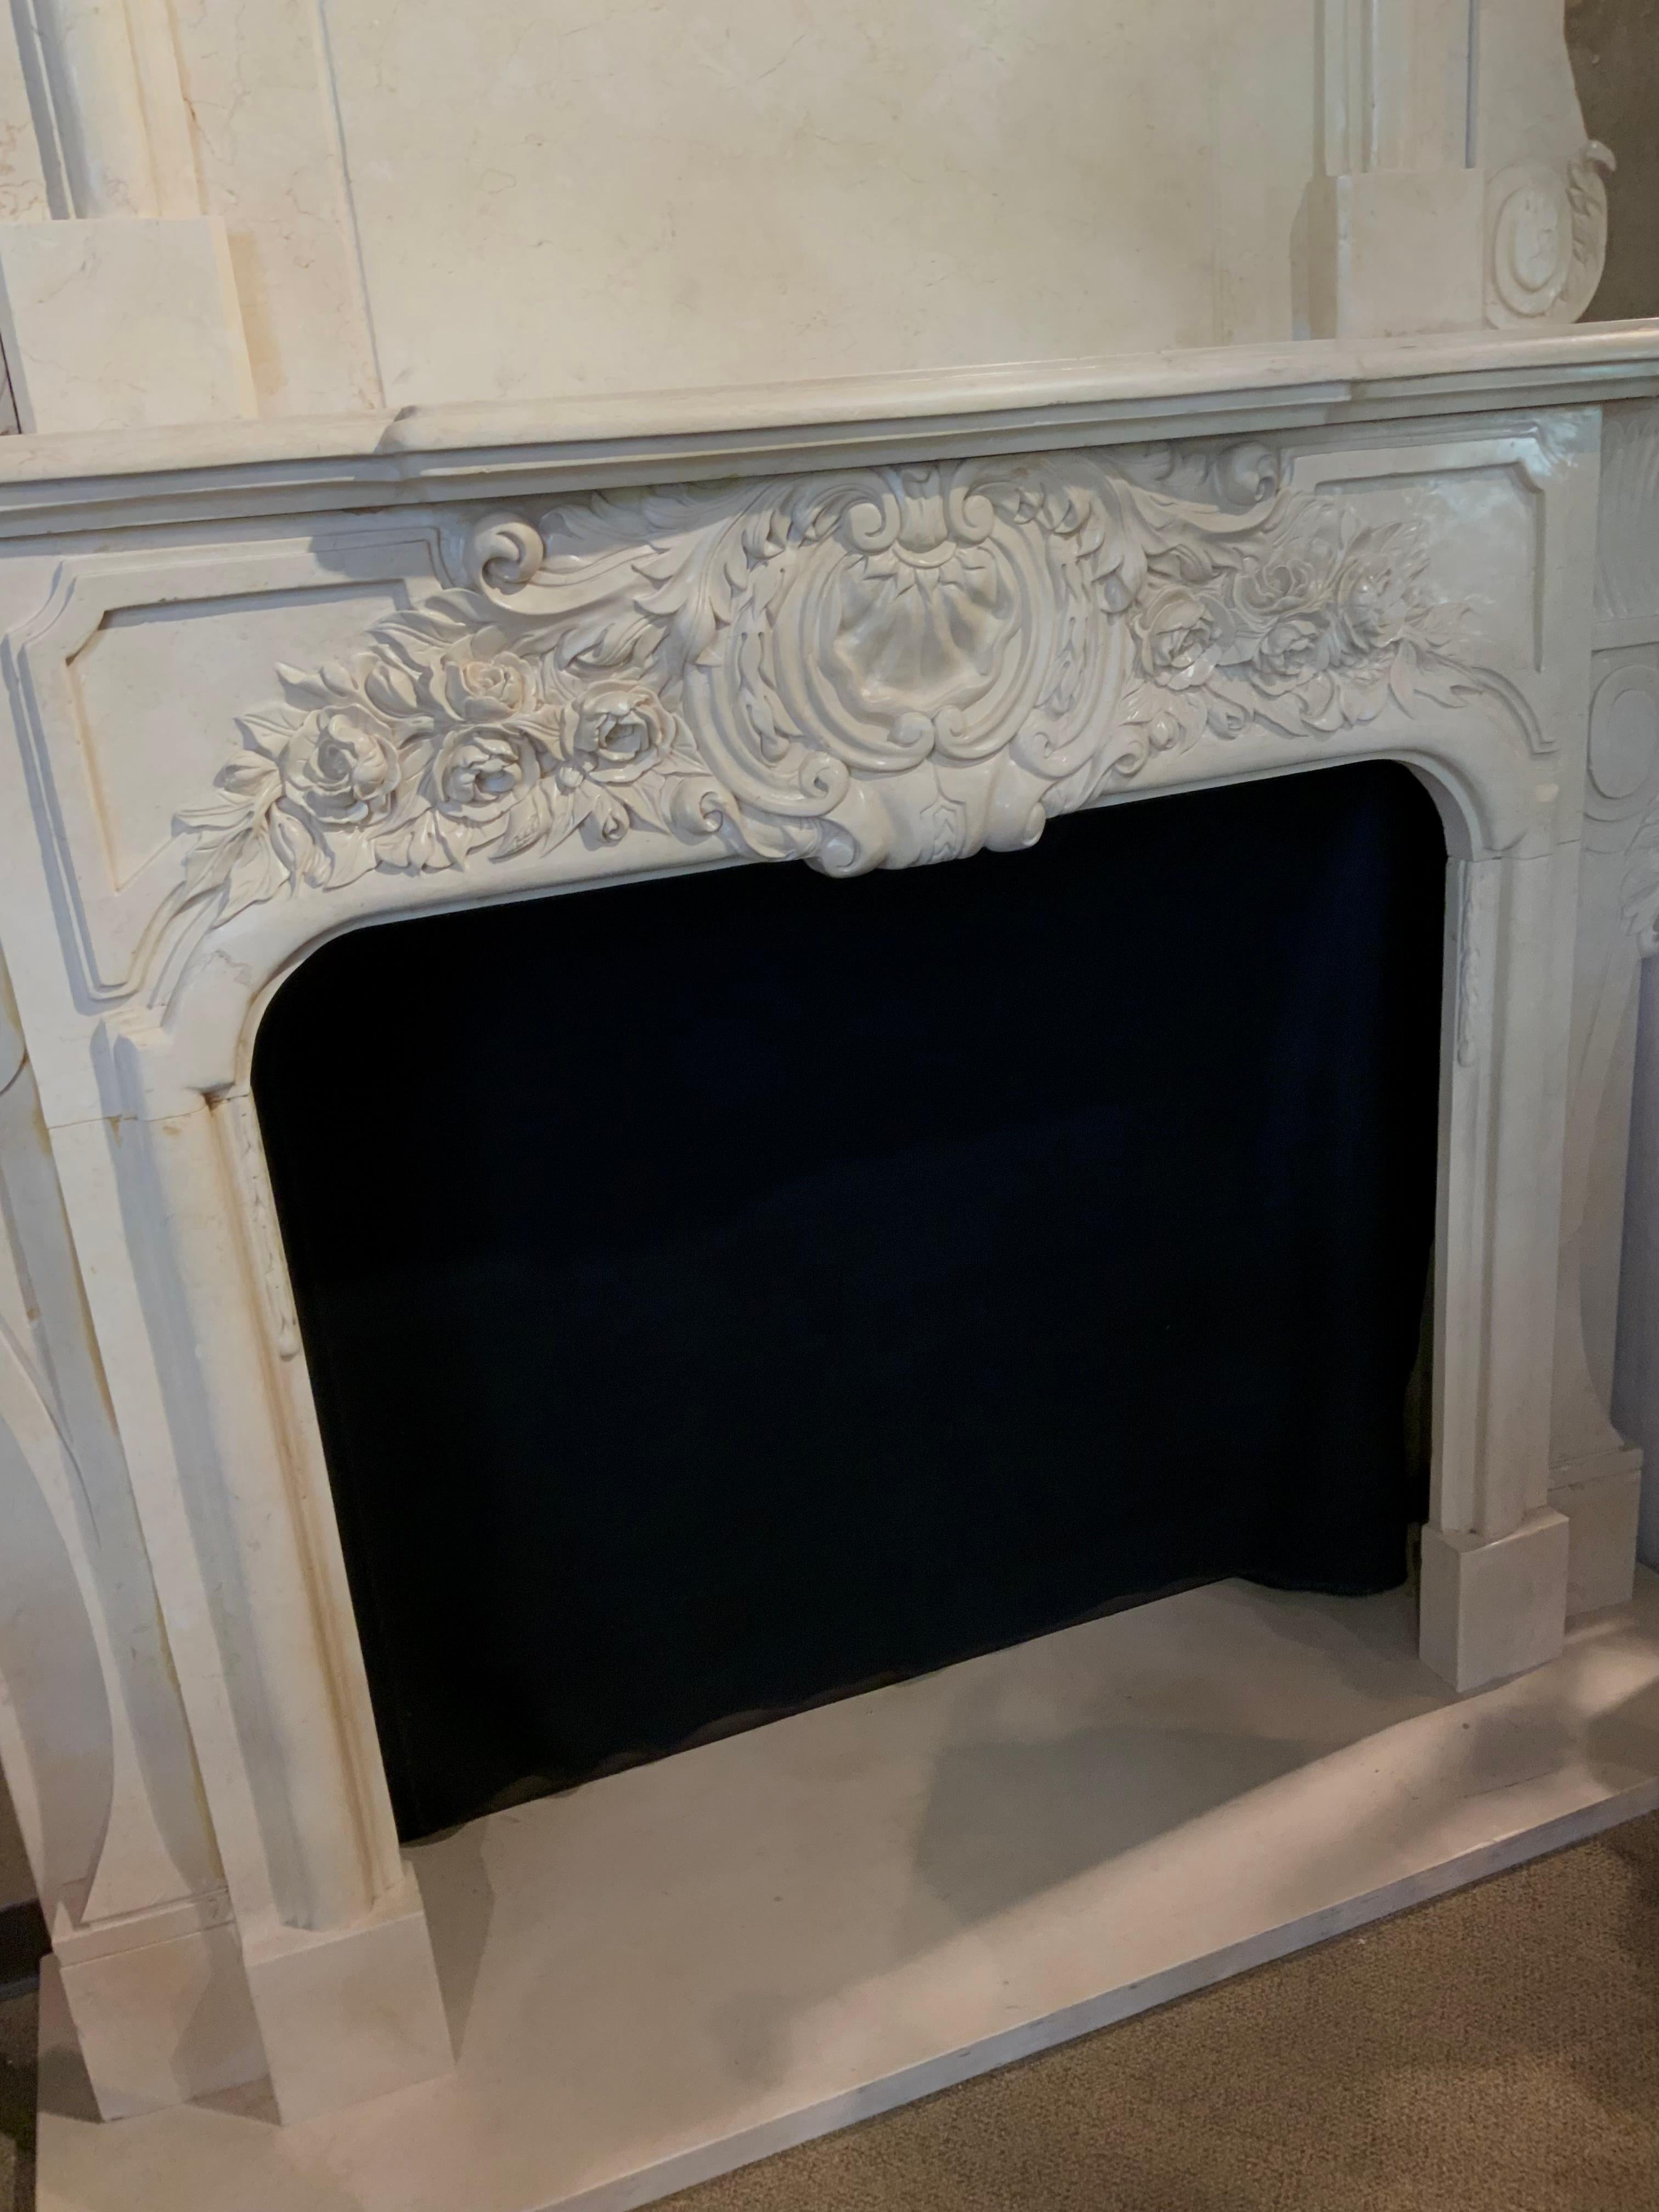 This mantel is considered a double mantel because it has
An upper structure that makes it very tall and elegant.
The carving is very good and has a cartouche at the top
And also has a central carved cartouche at the center of
This mantel. The